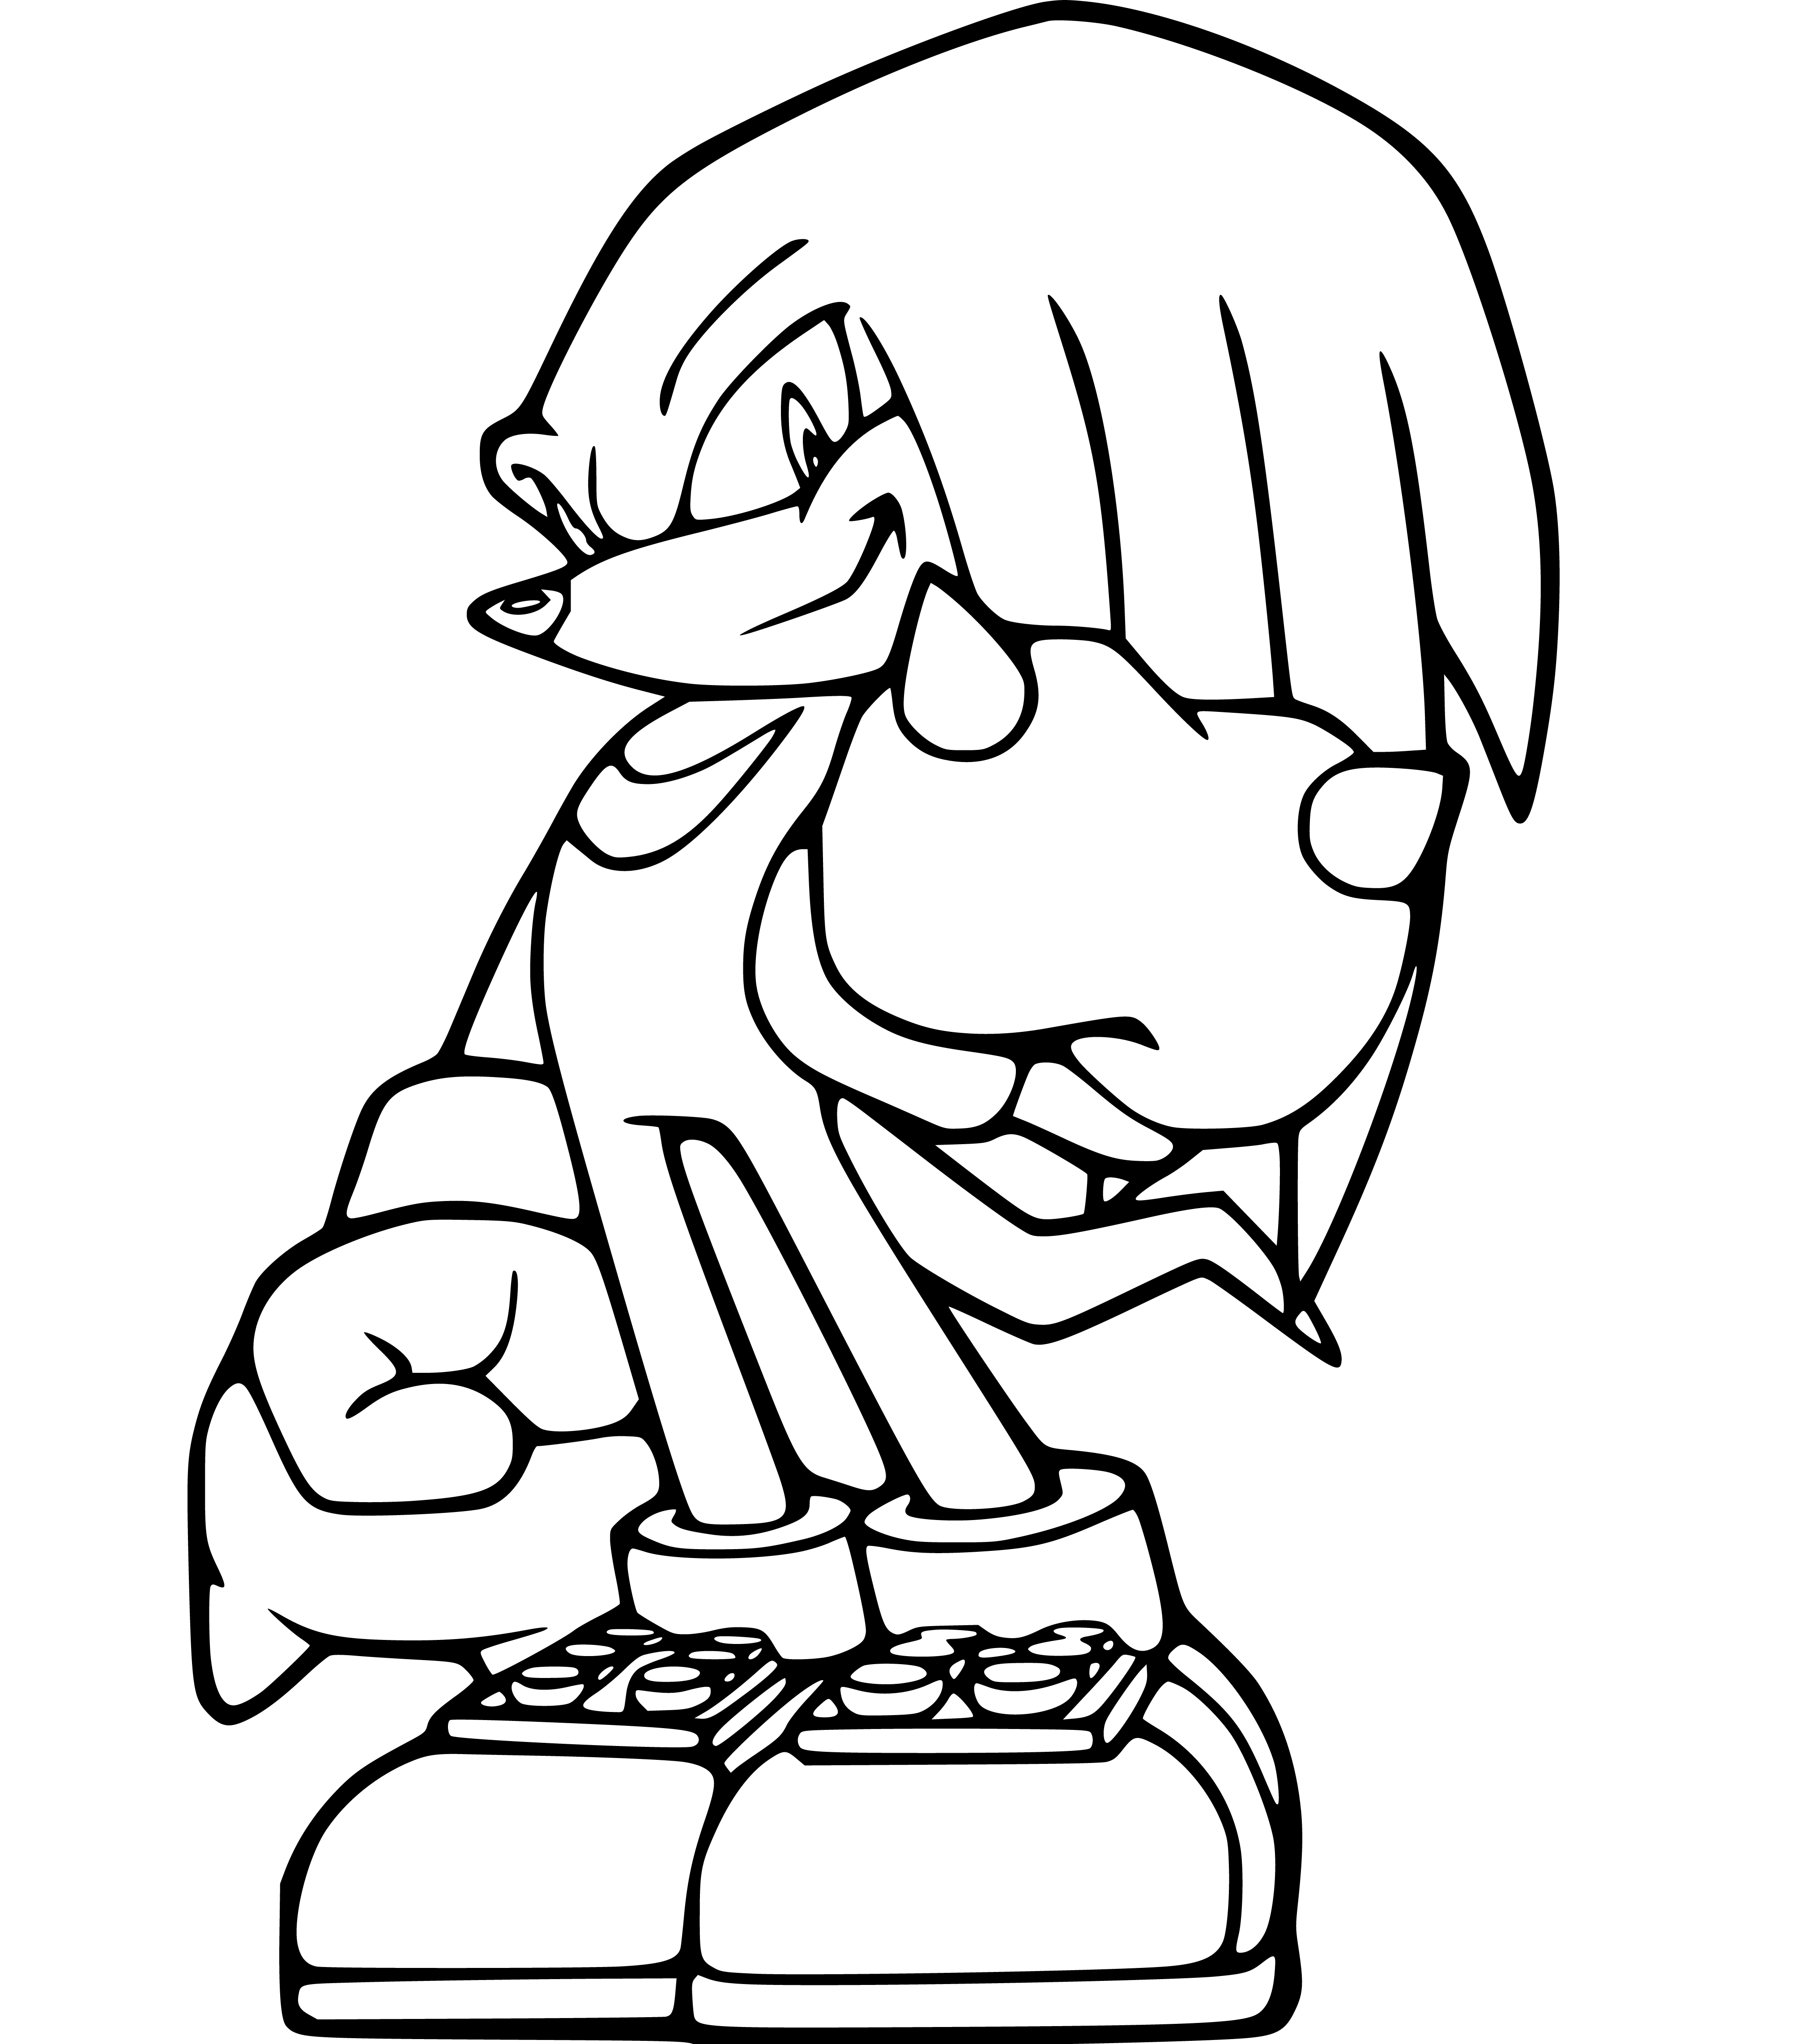 Knuckles Coloring Page (SONIC) - SheetalColor.com